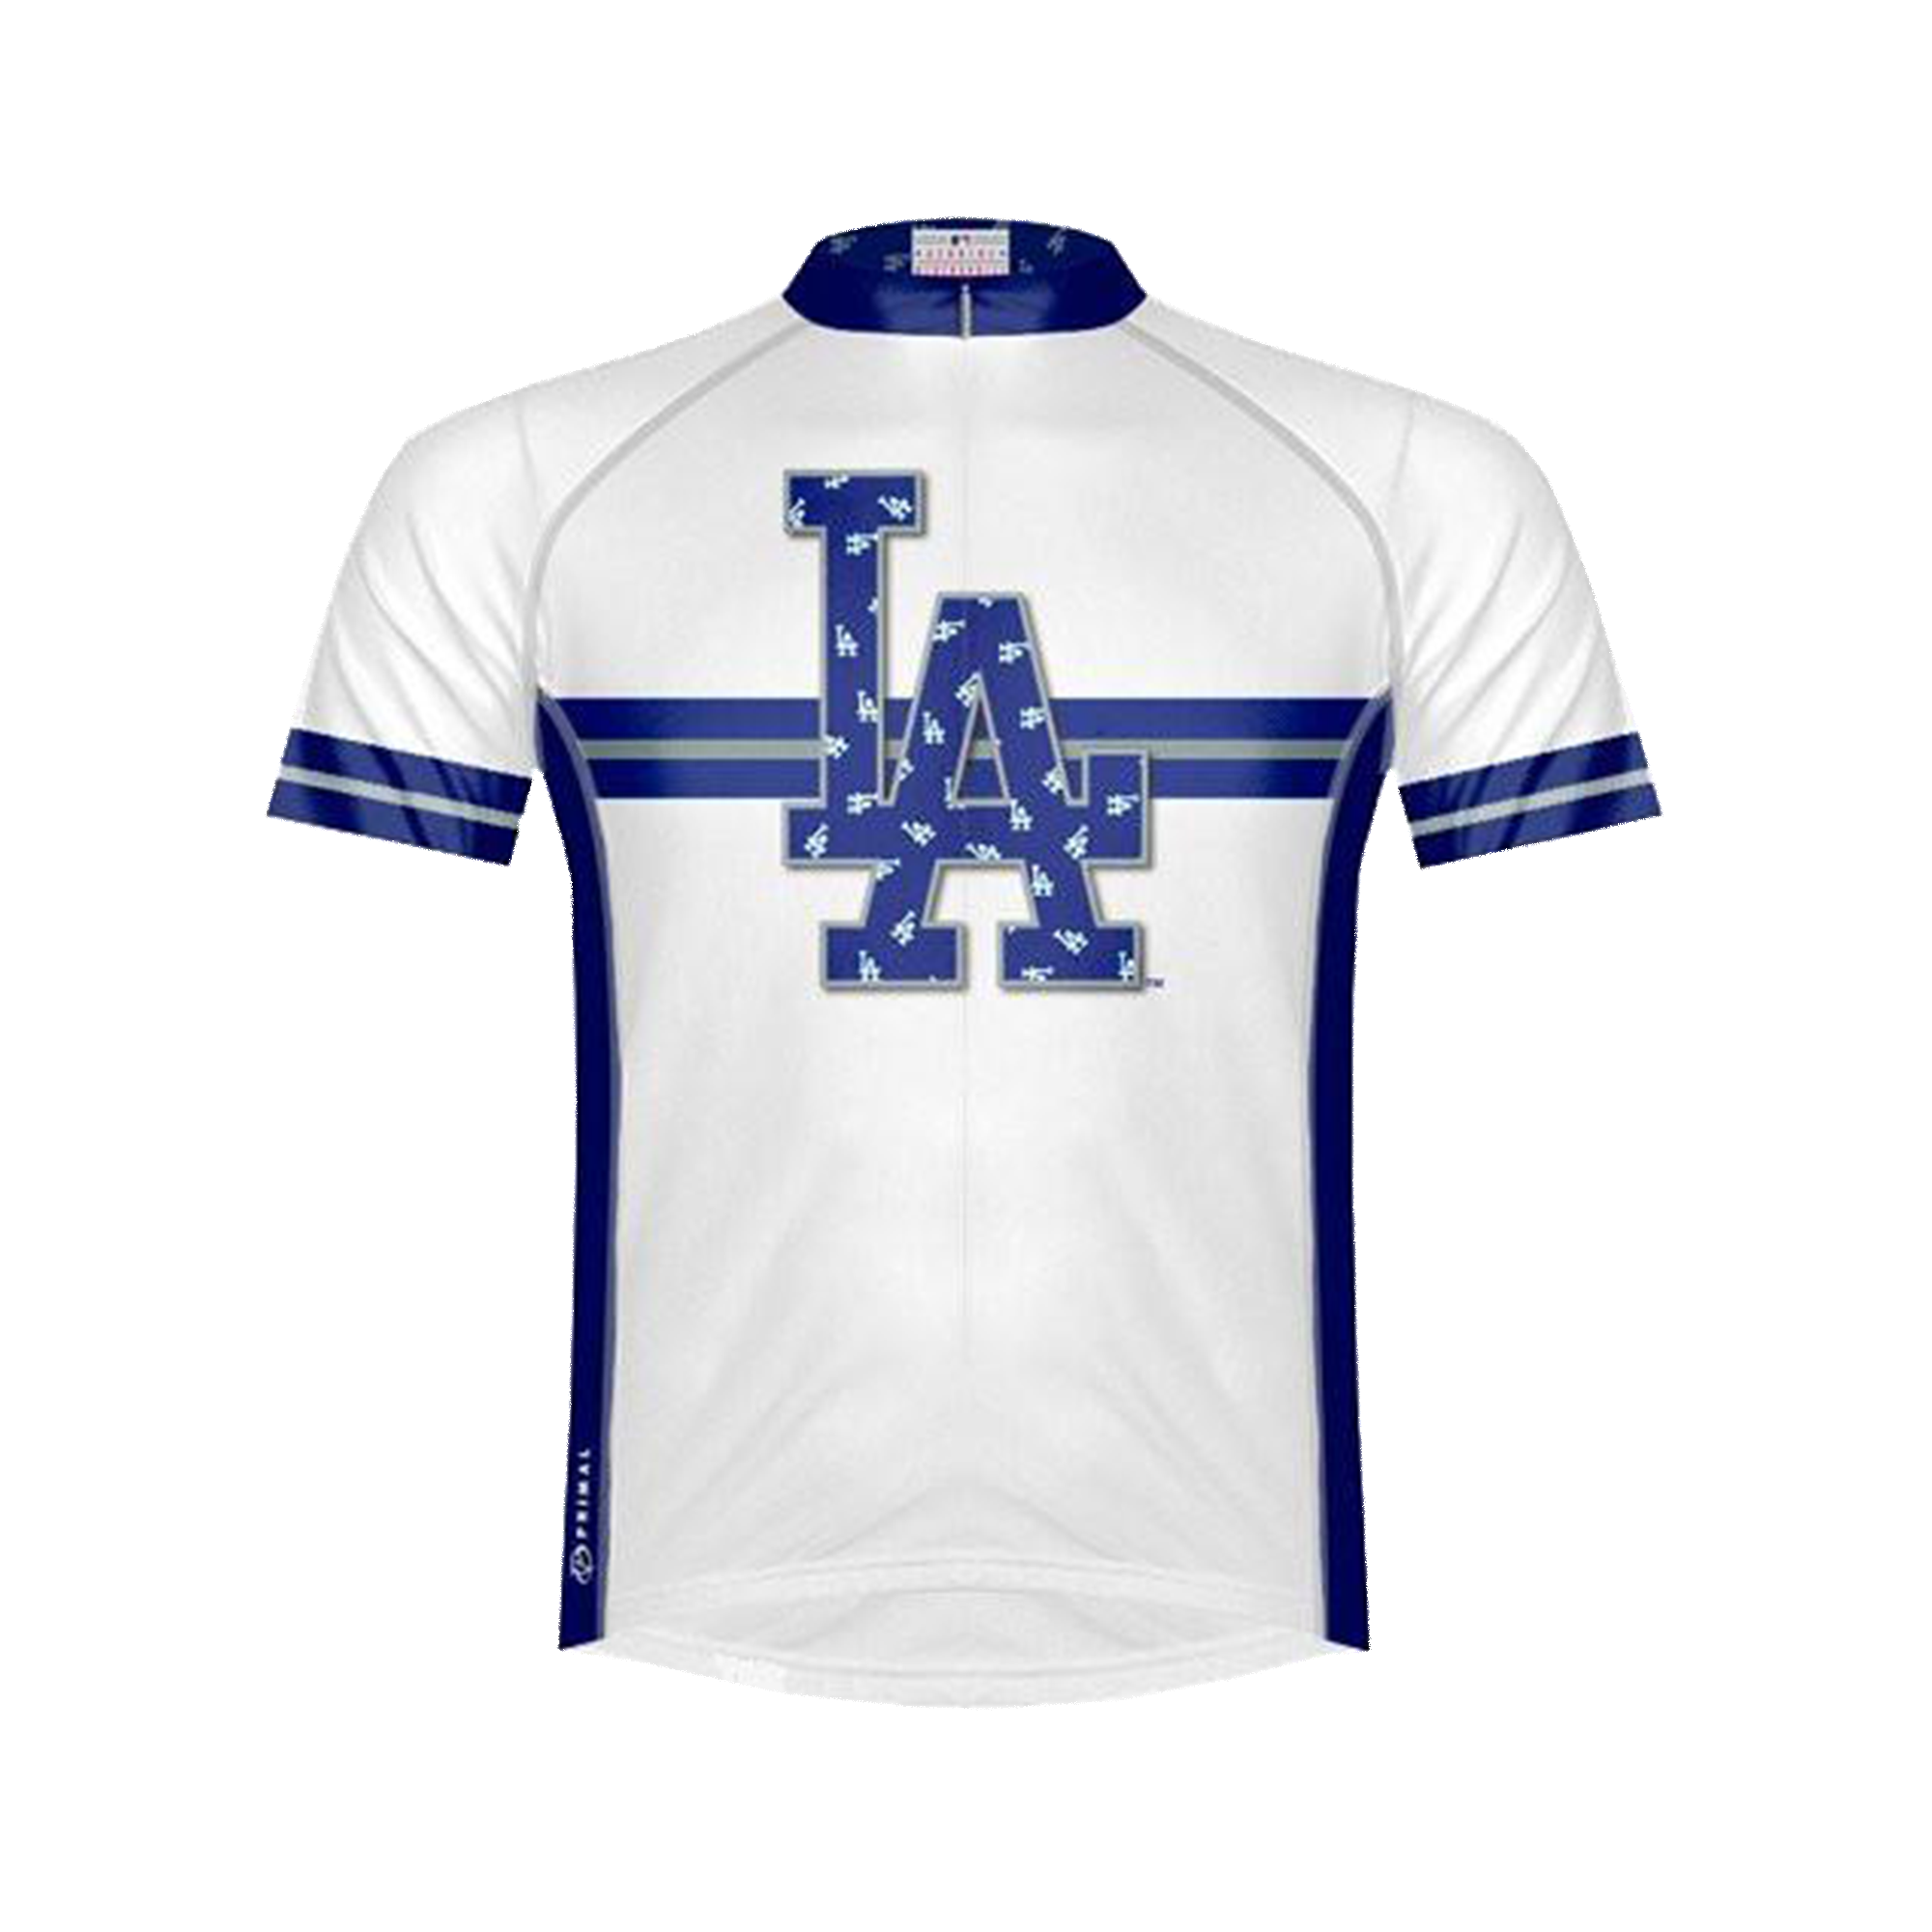 dodgers army jersey